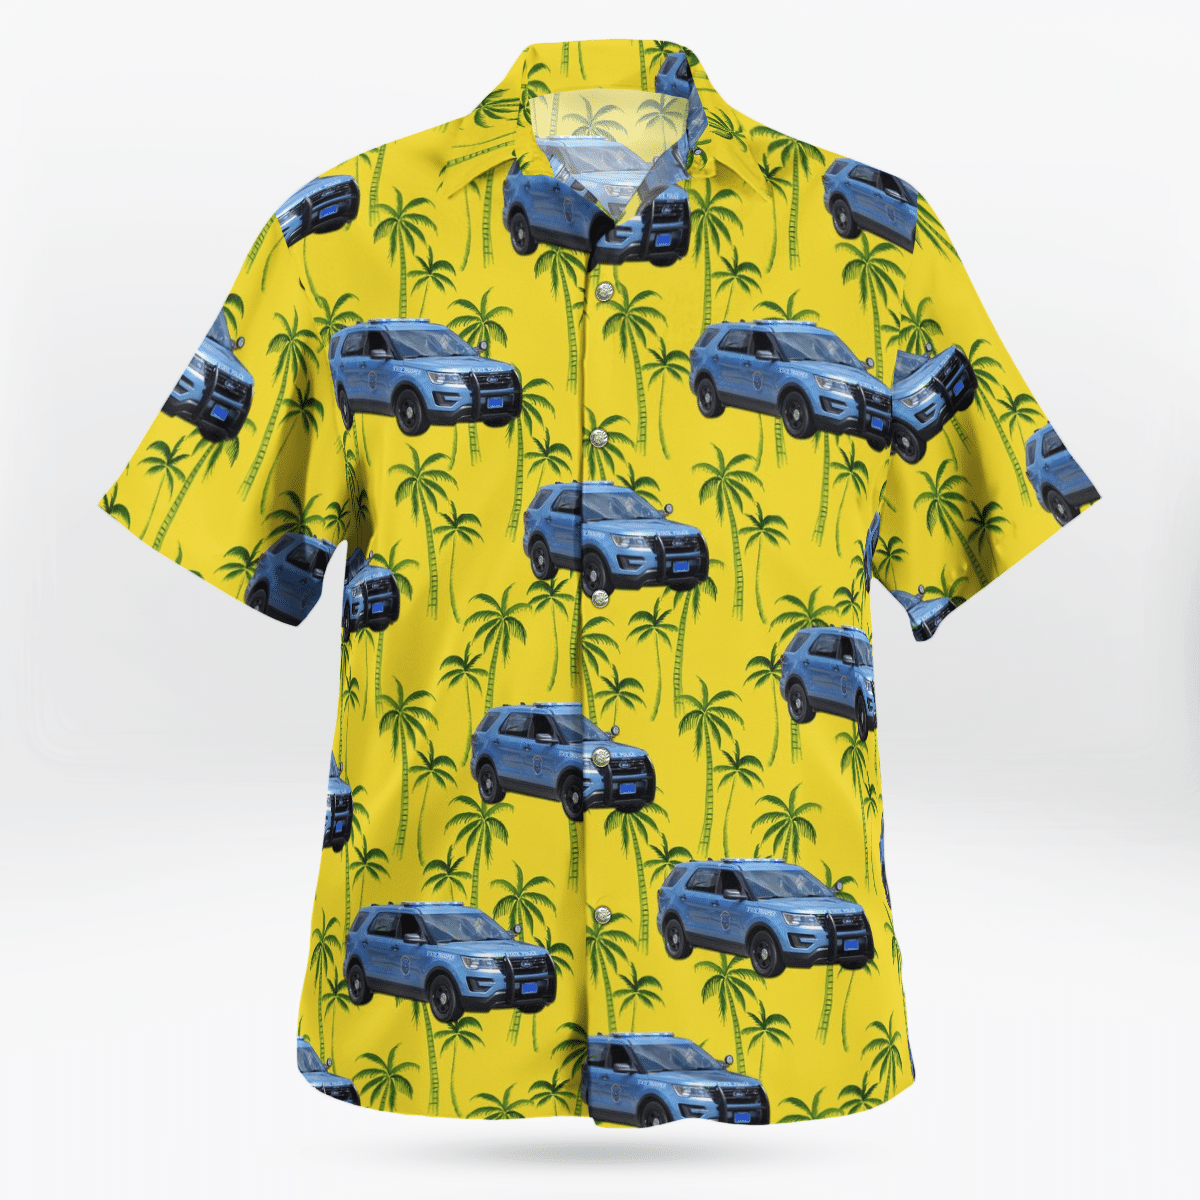 Hawaiian shirts never go out of style 231